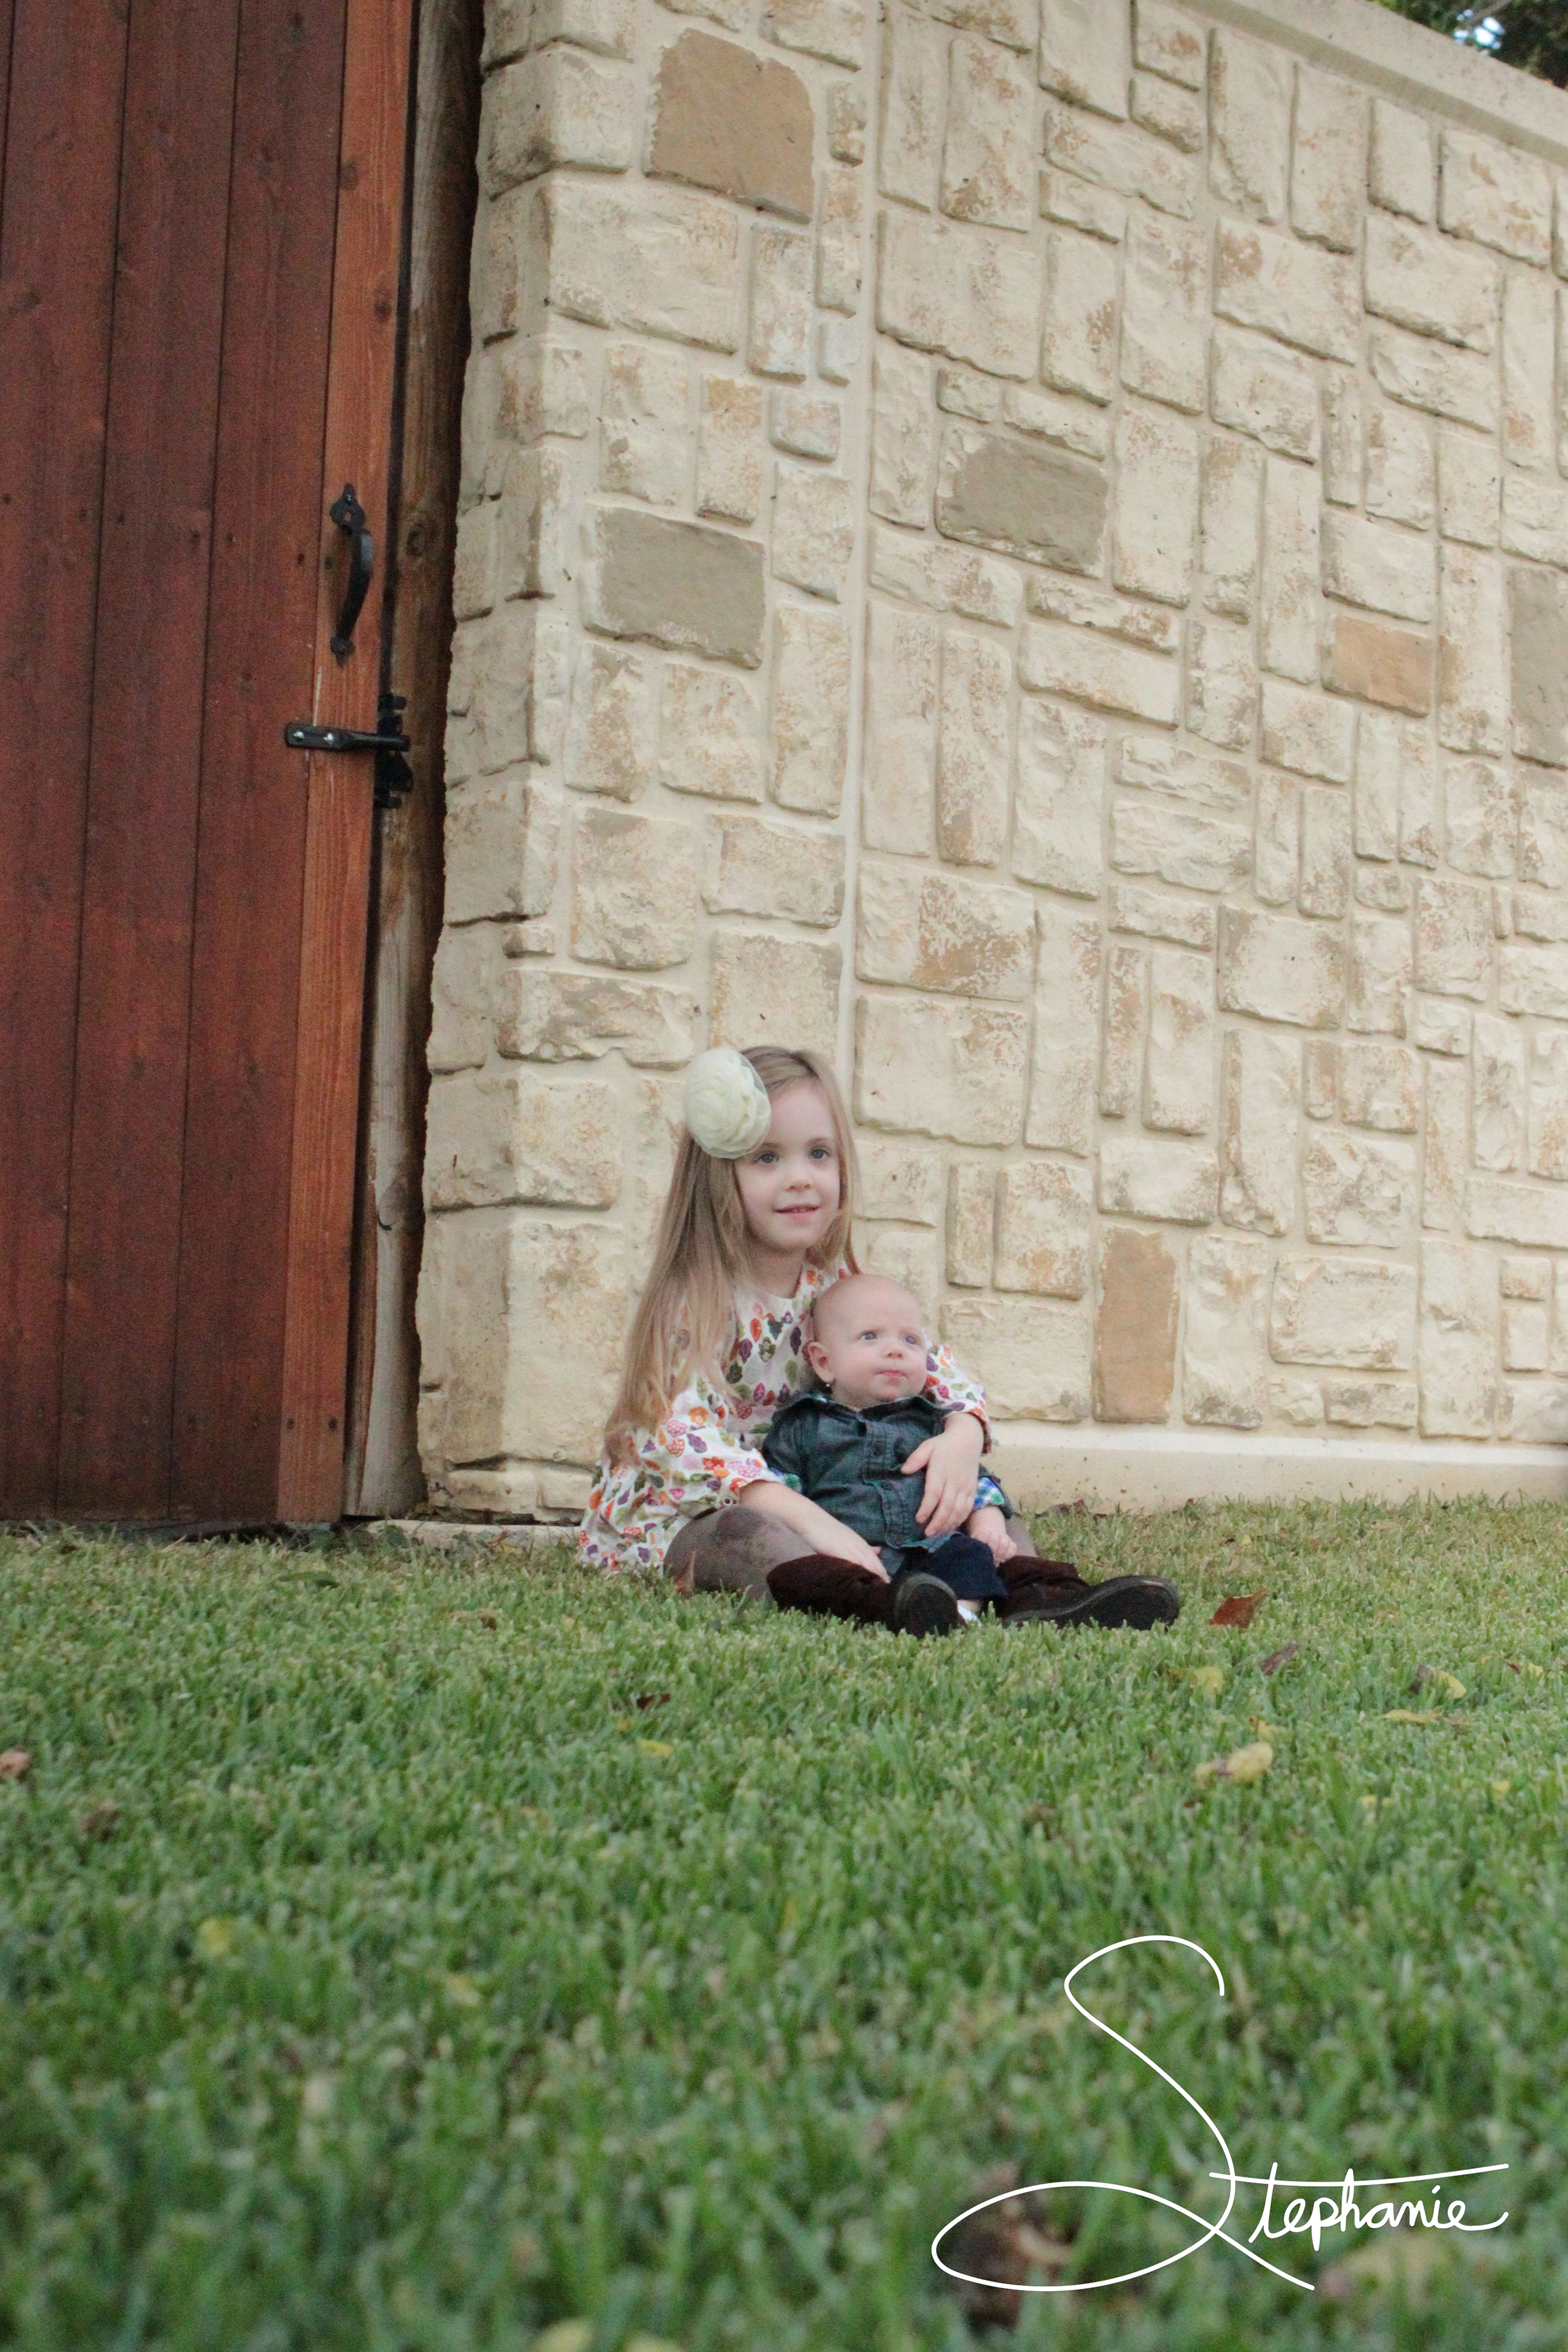 Photo of two small children sitting in the grass.